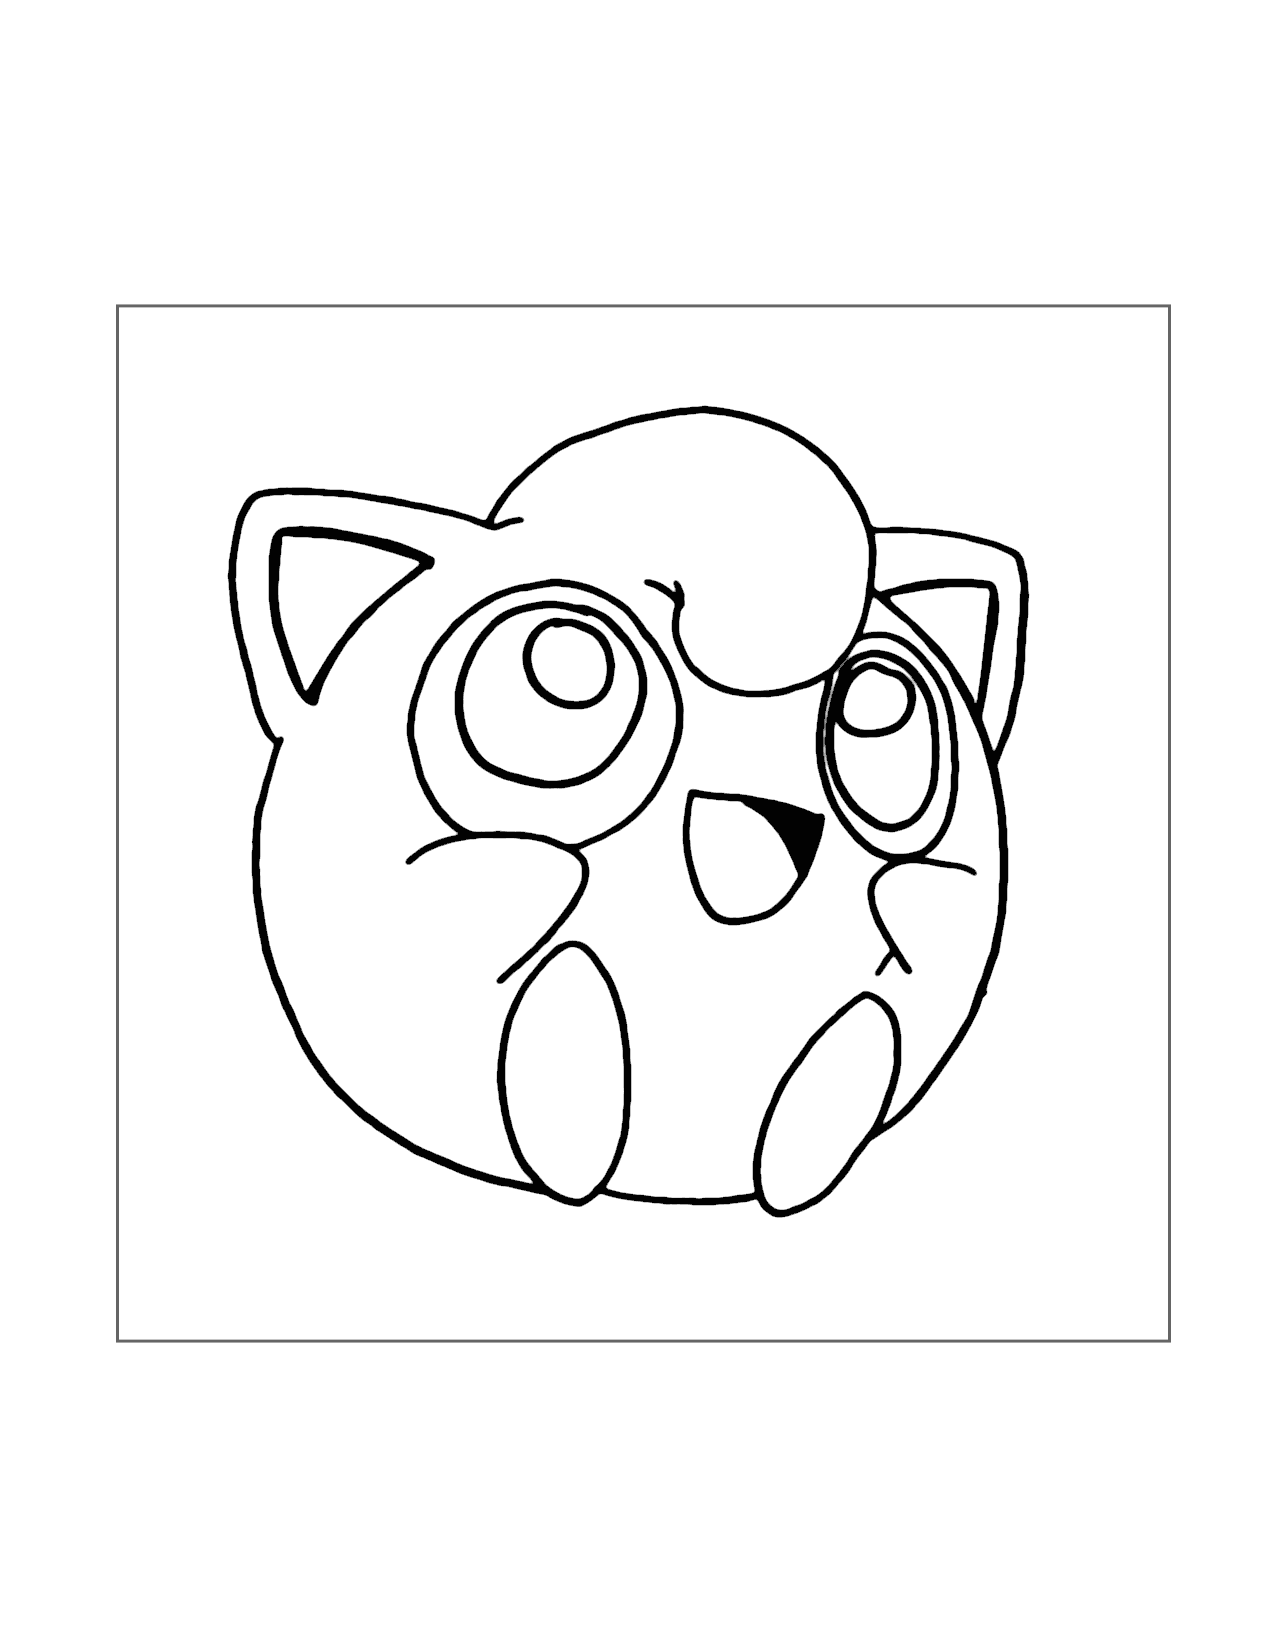 Cute Jigglypuff Coloring Page